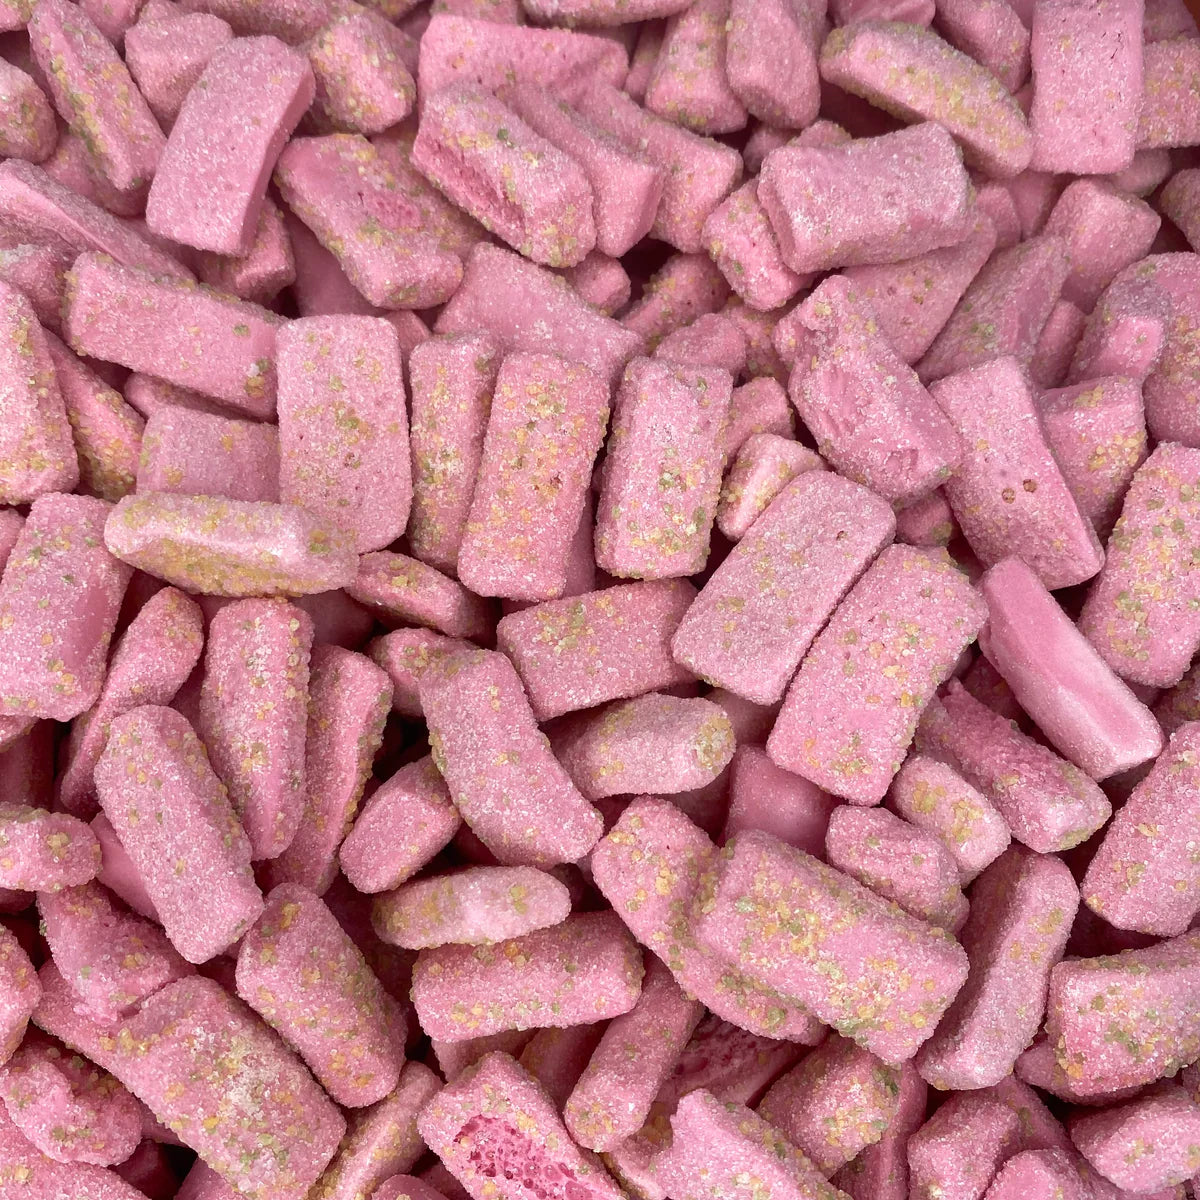 Freeze Dried Single Sweets: 15 Flavours To Choose From